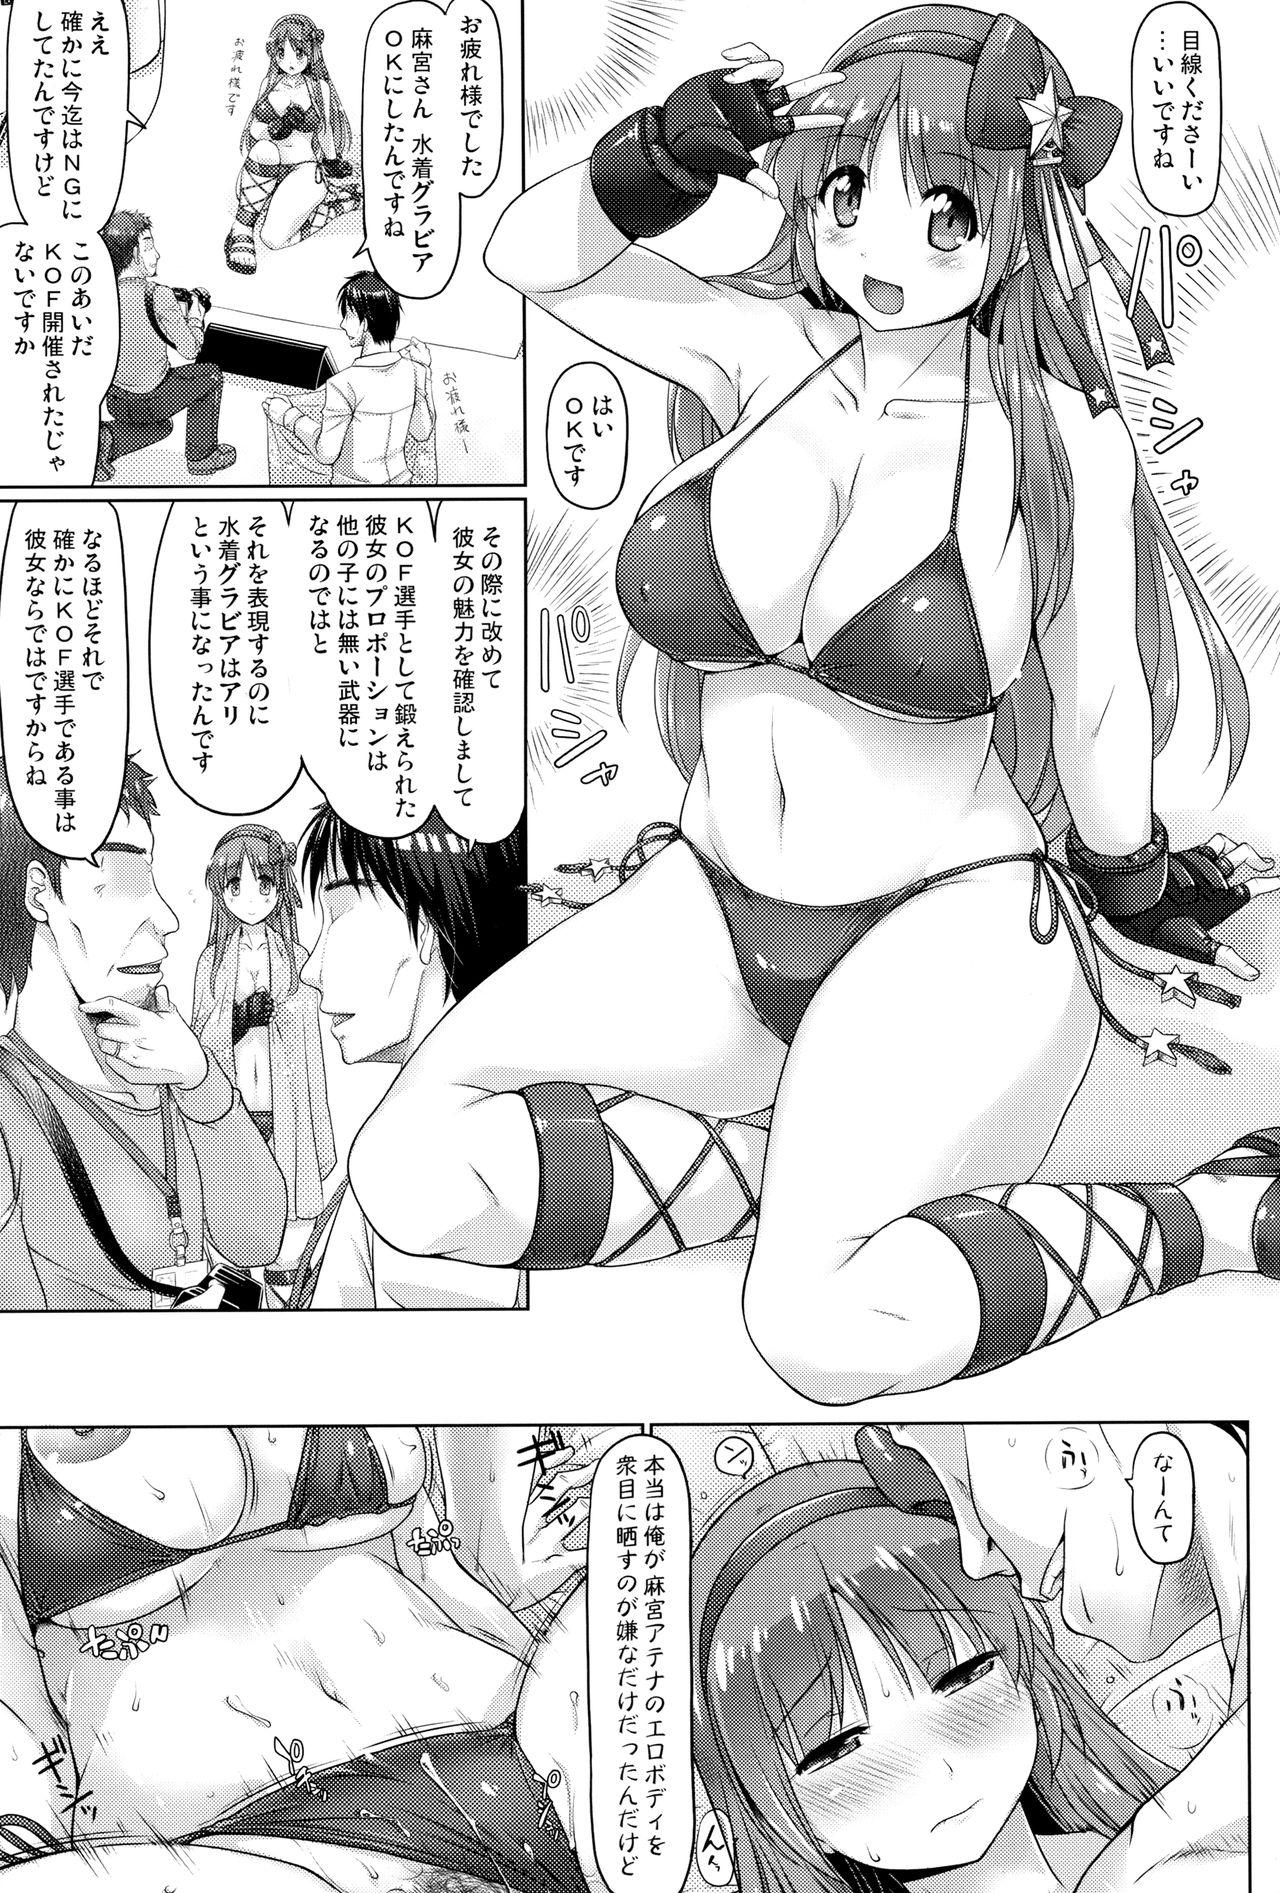 Scissoring RedVibration Asamiya Athena - King of fighters Ejaculation - Page 2